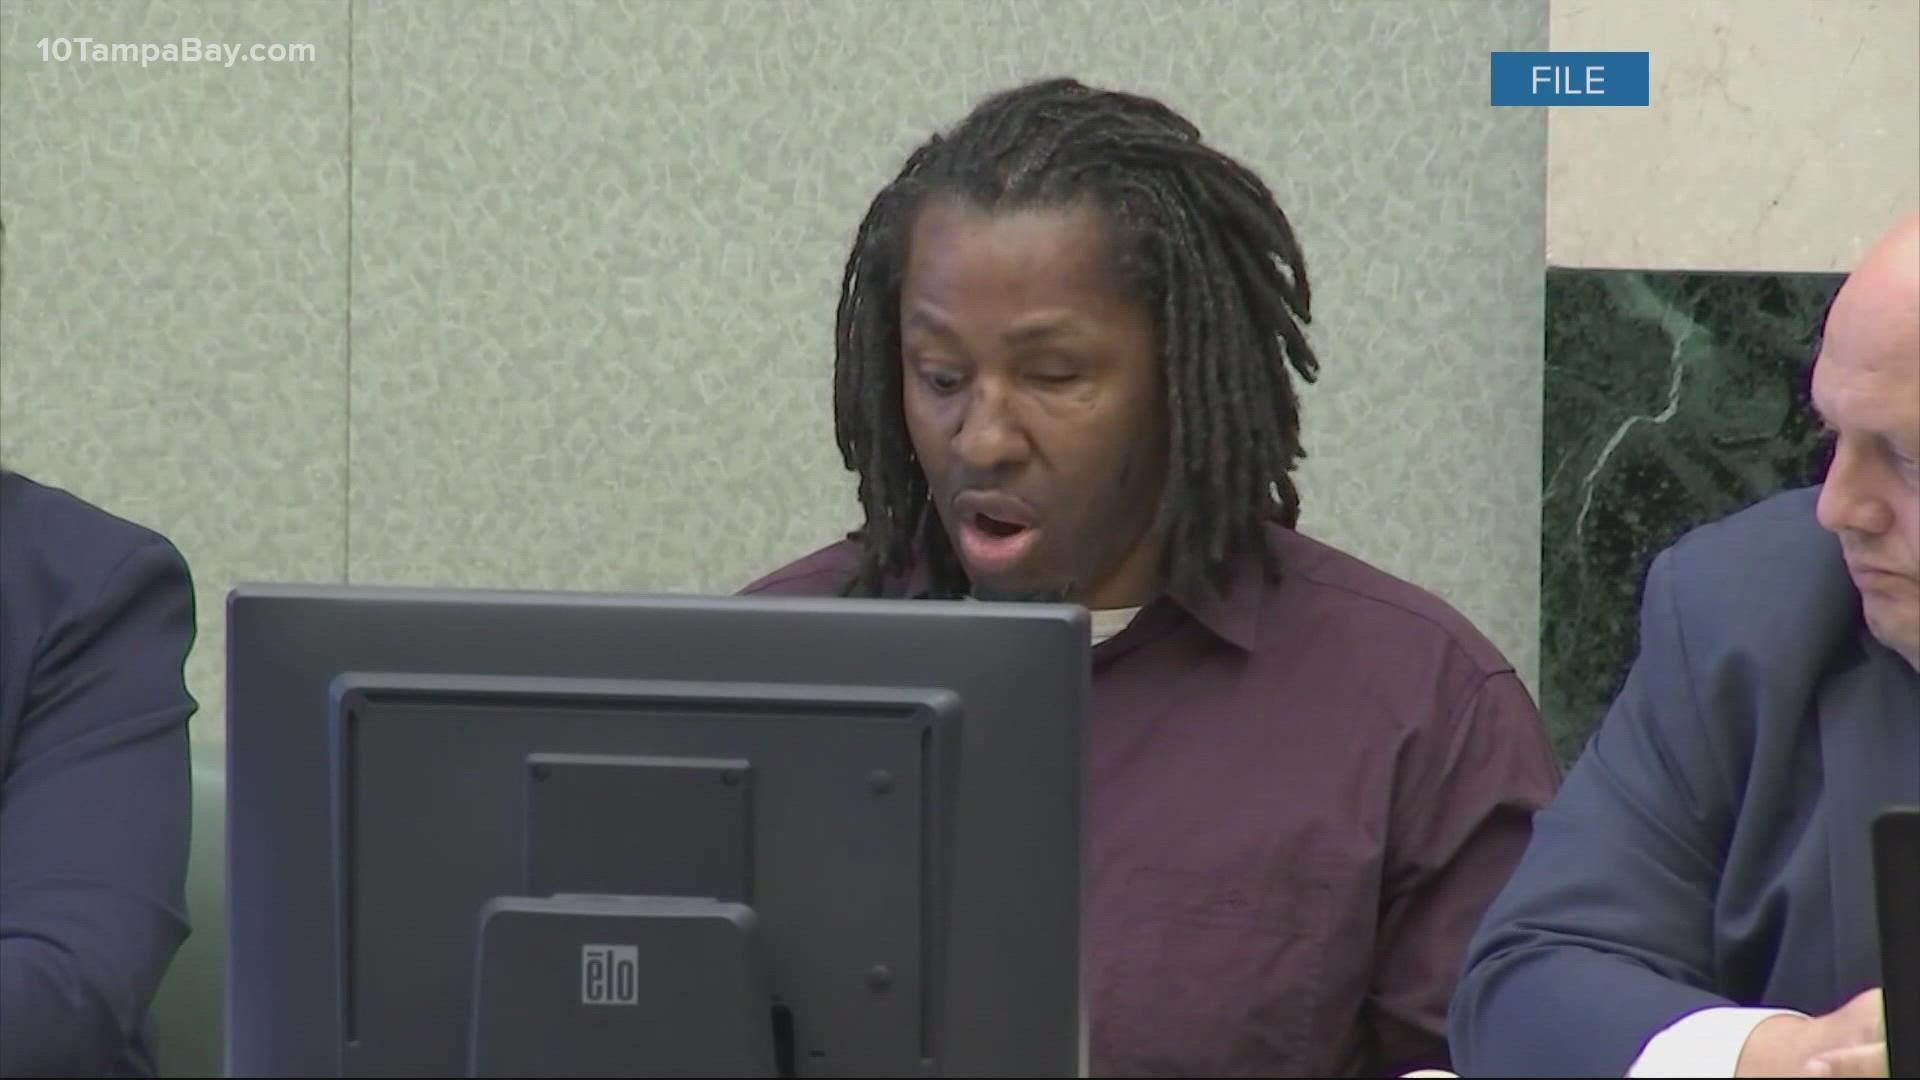 He was previously convicted of murdering Orlando Police Lt. Debra Clayton.